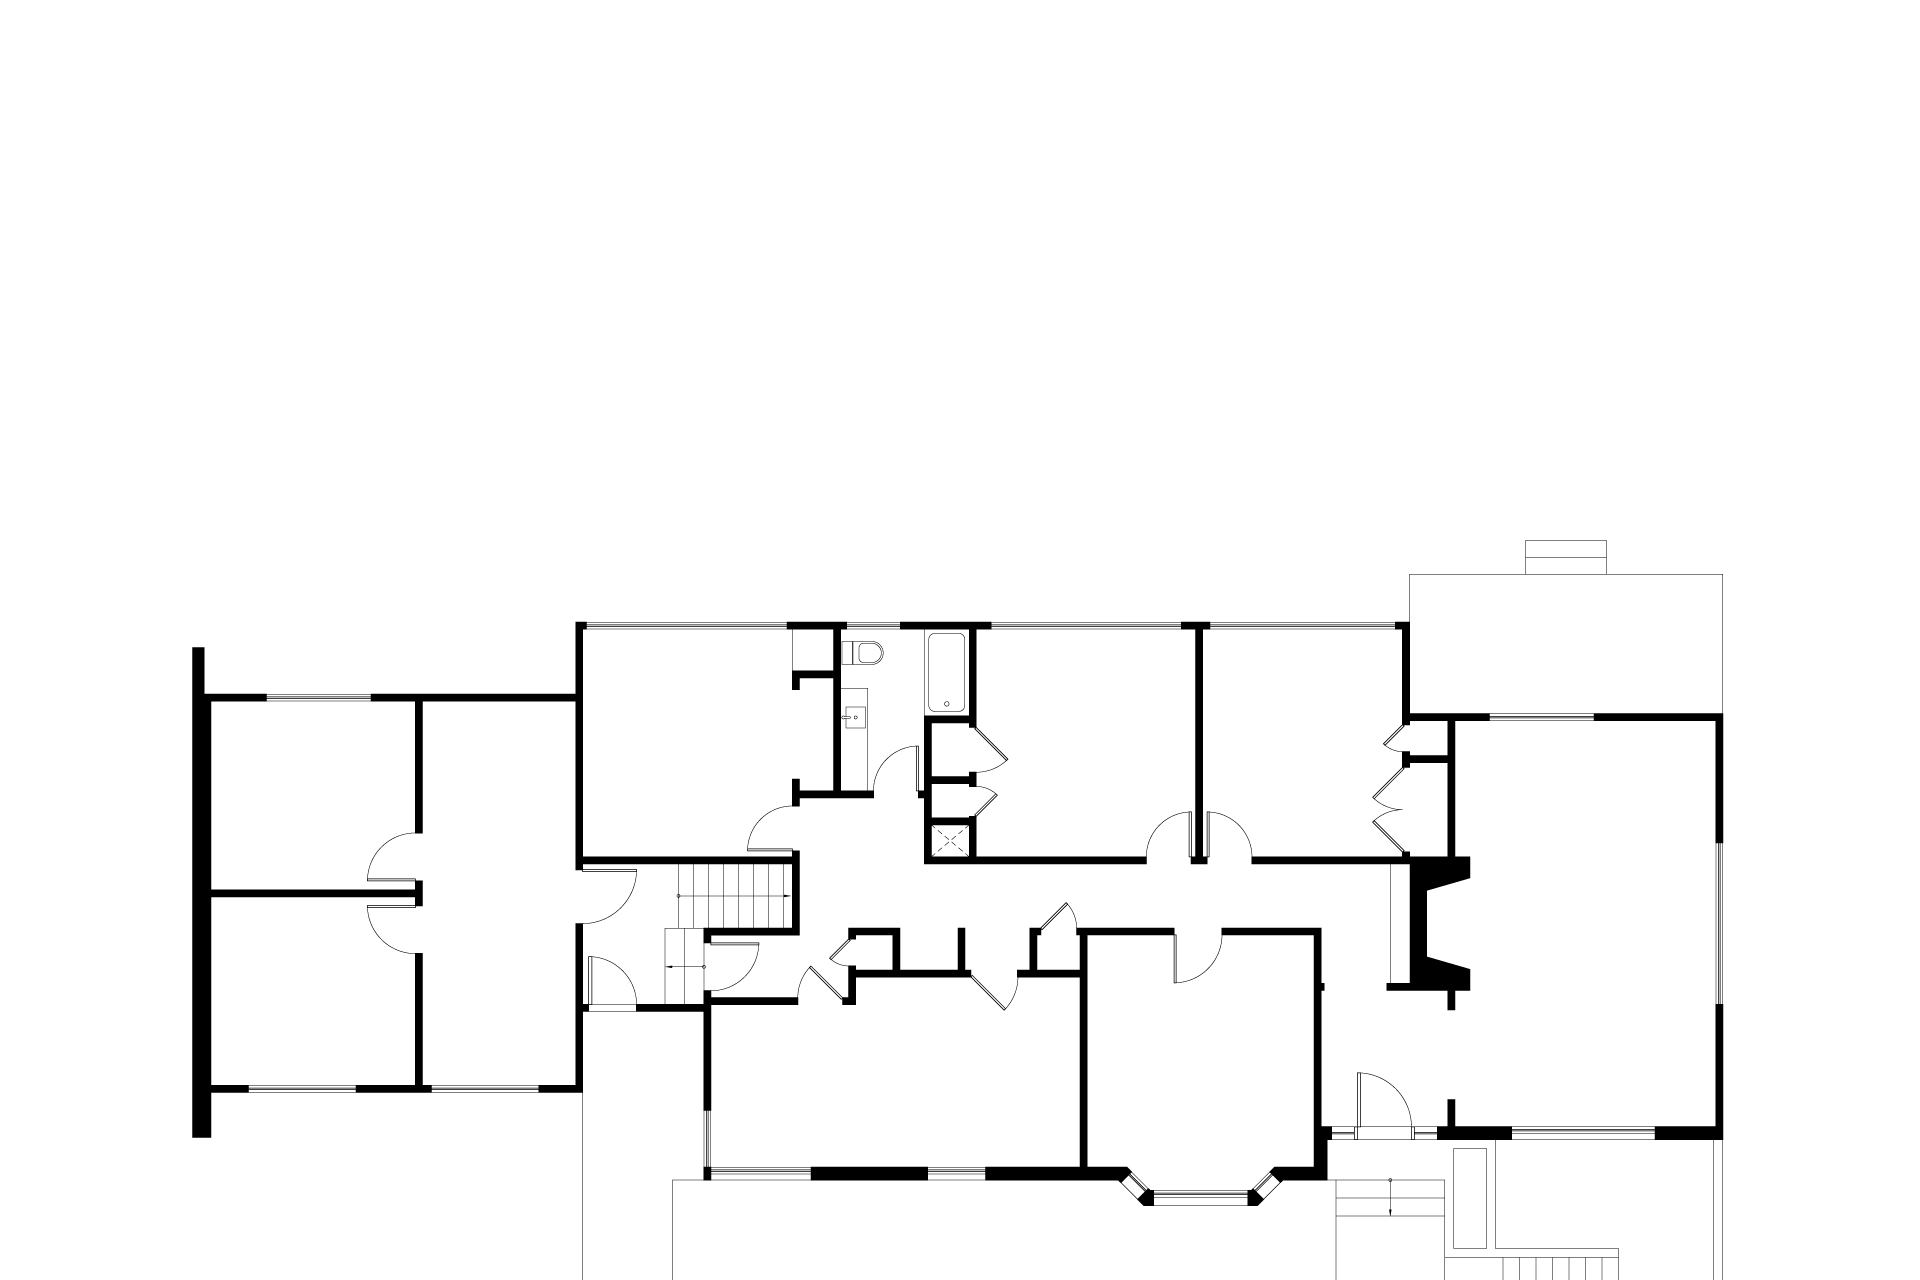 This is a floor plan drawing of the Gateway Medical Clinic before being renovated.